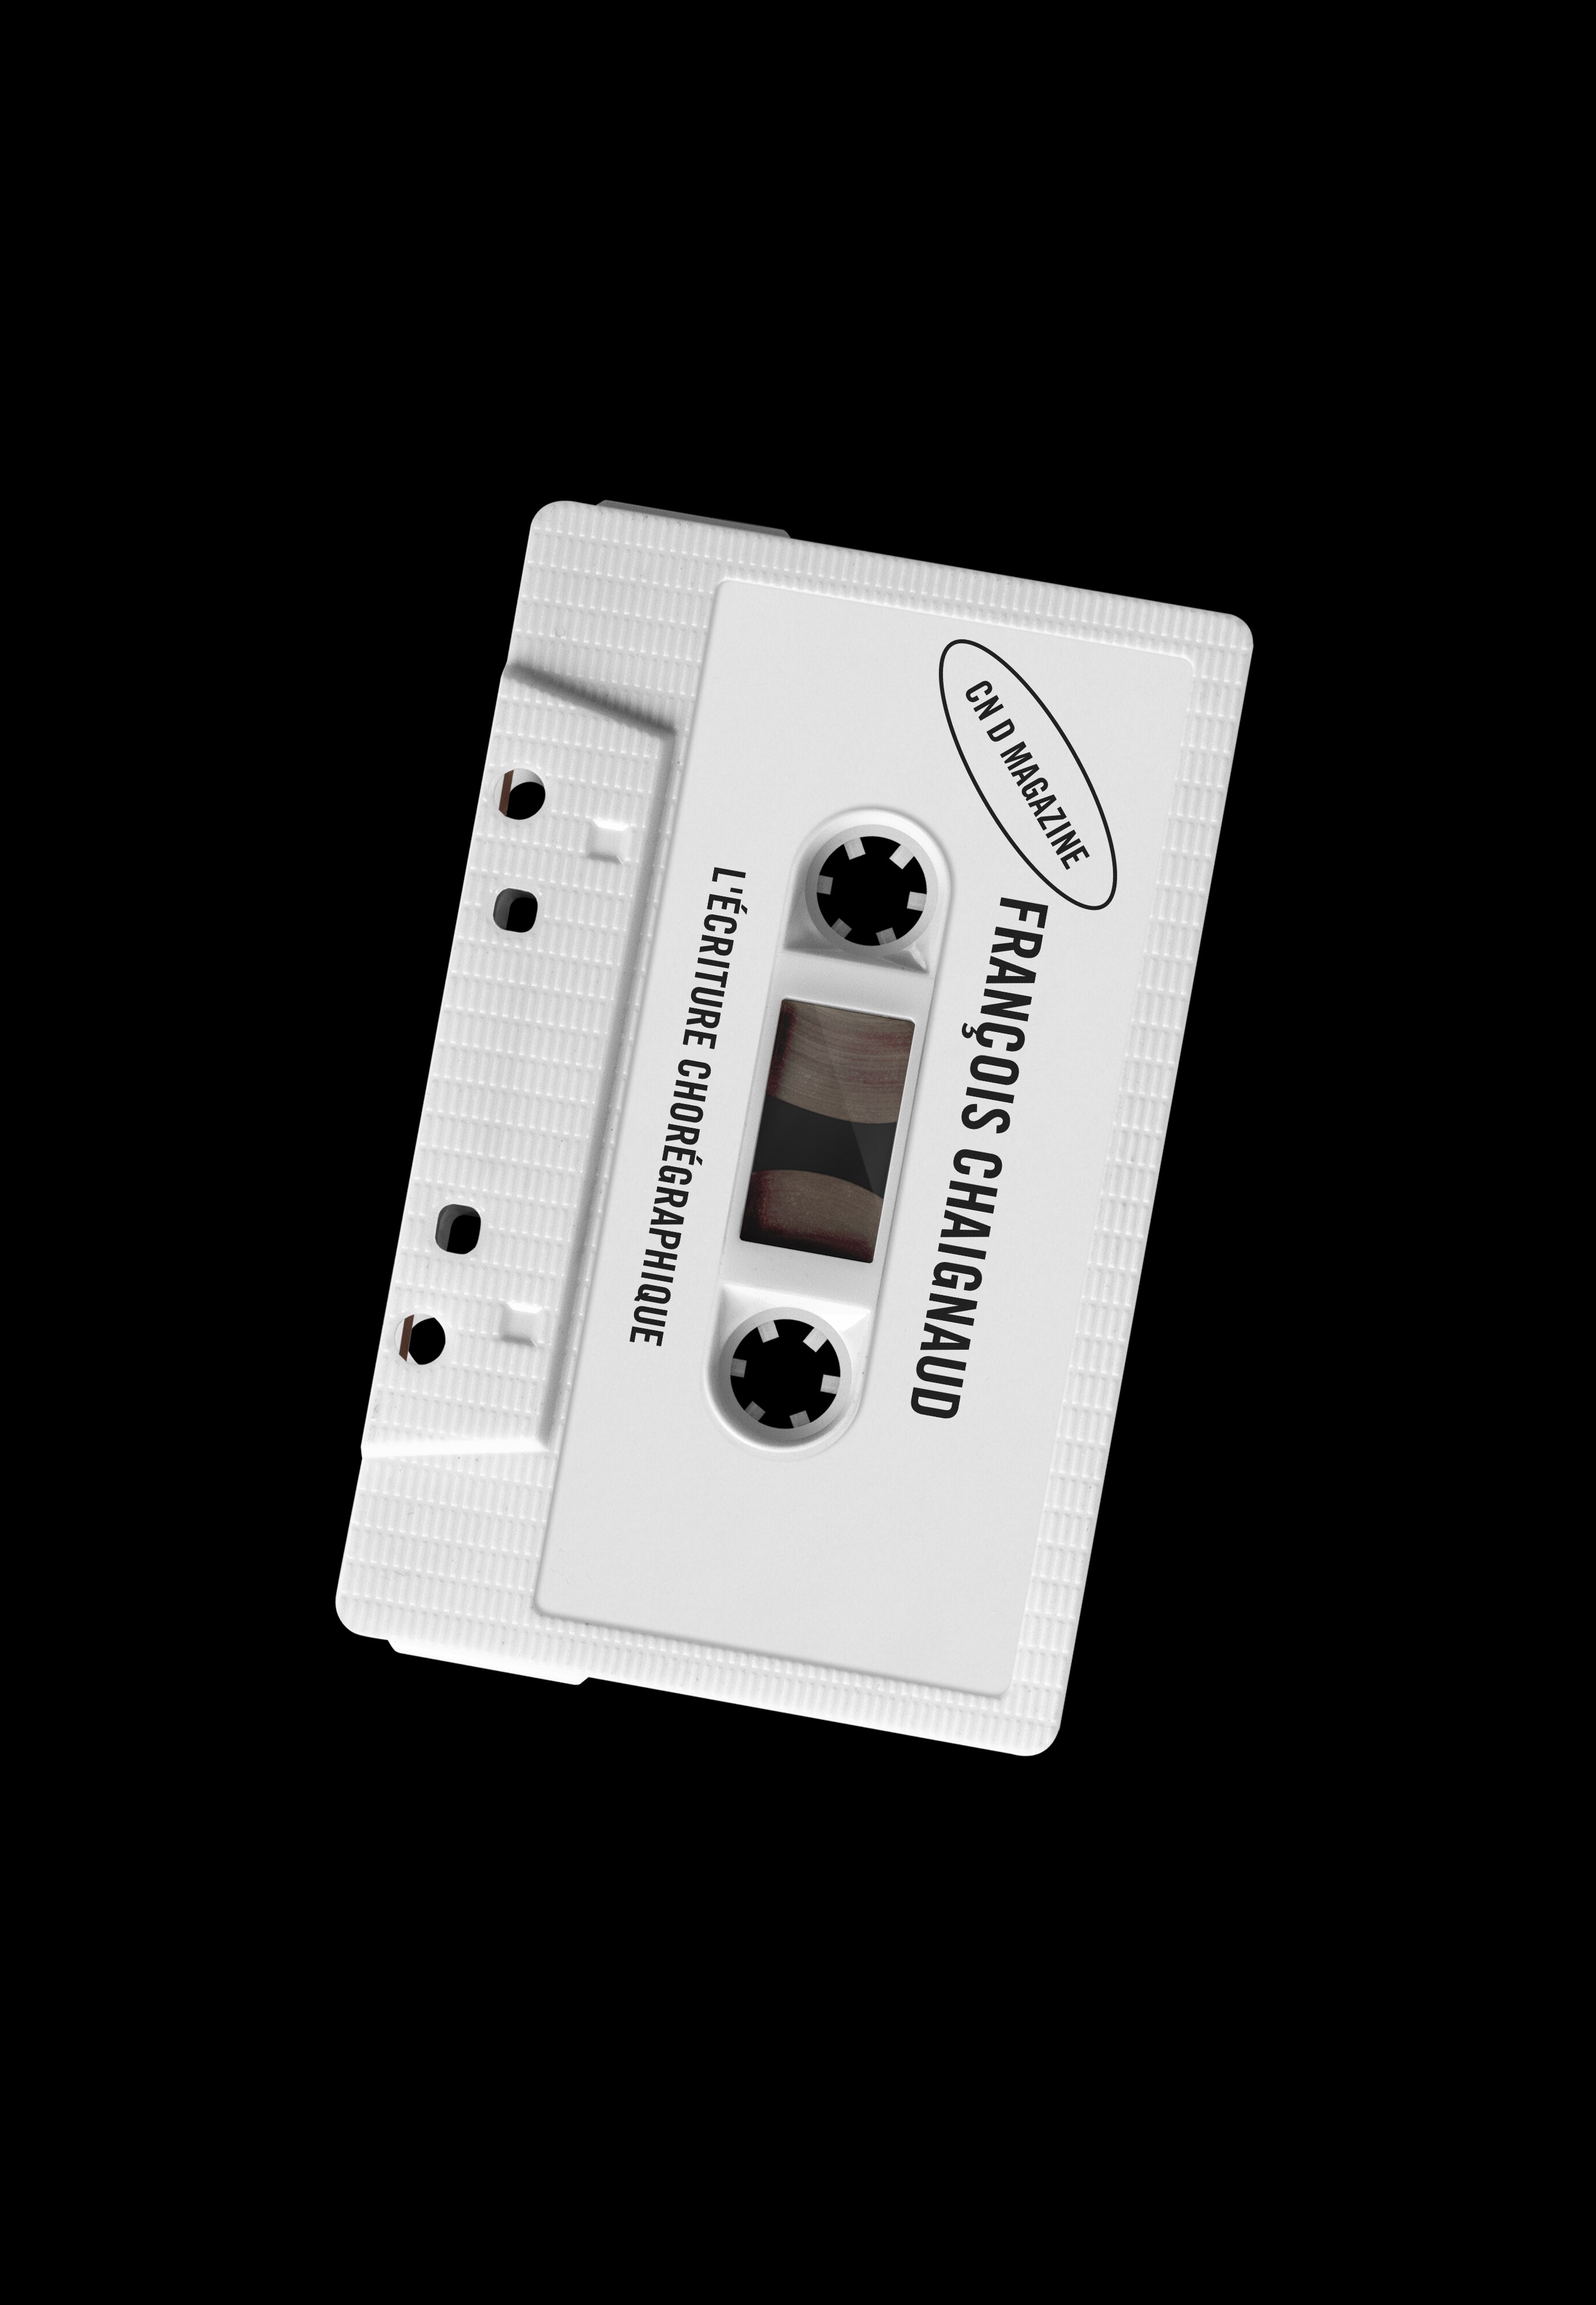 A white audio cassette on a black background with the name of François Chaignaud